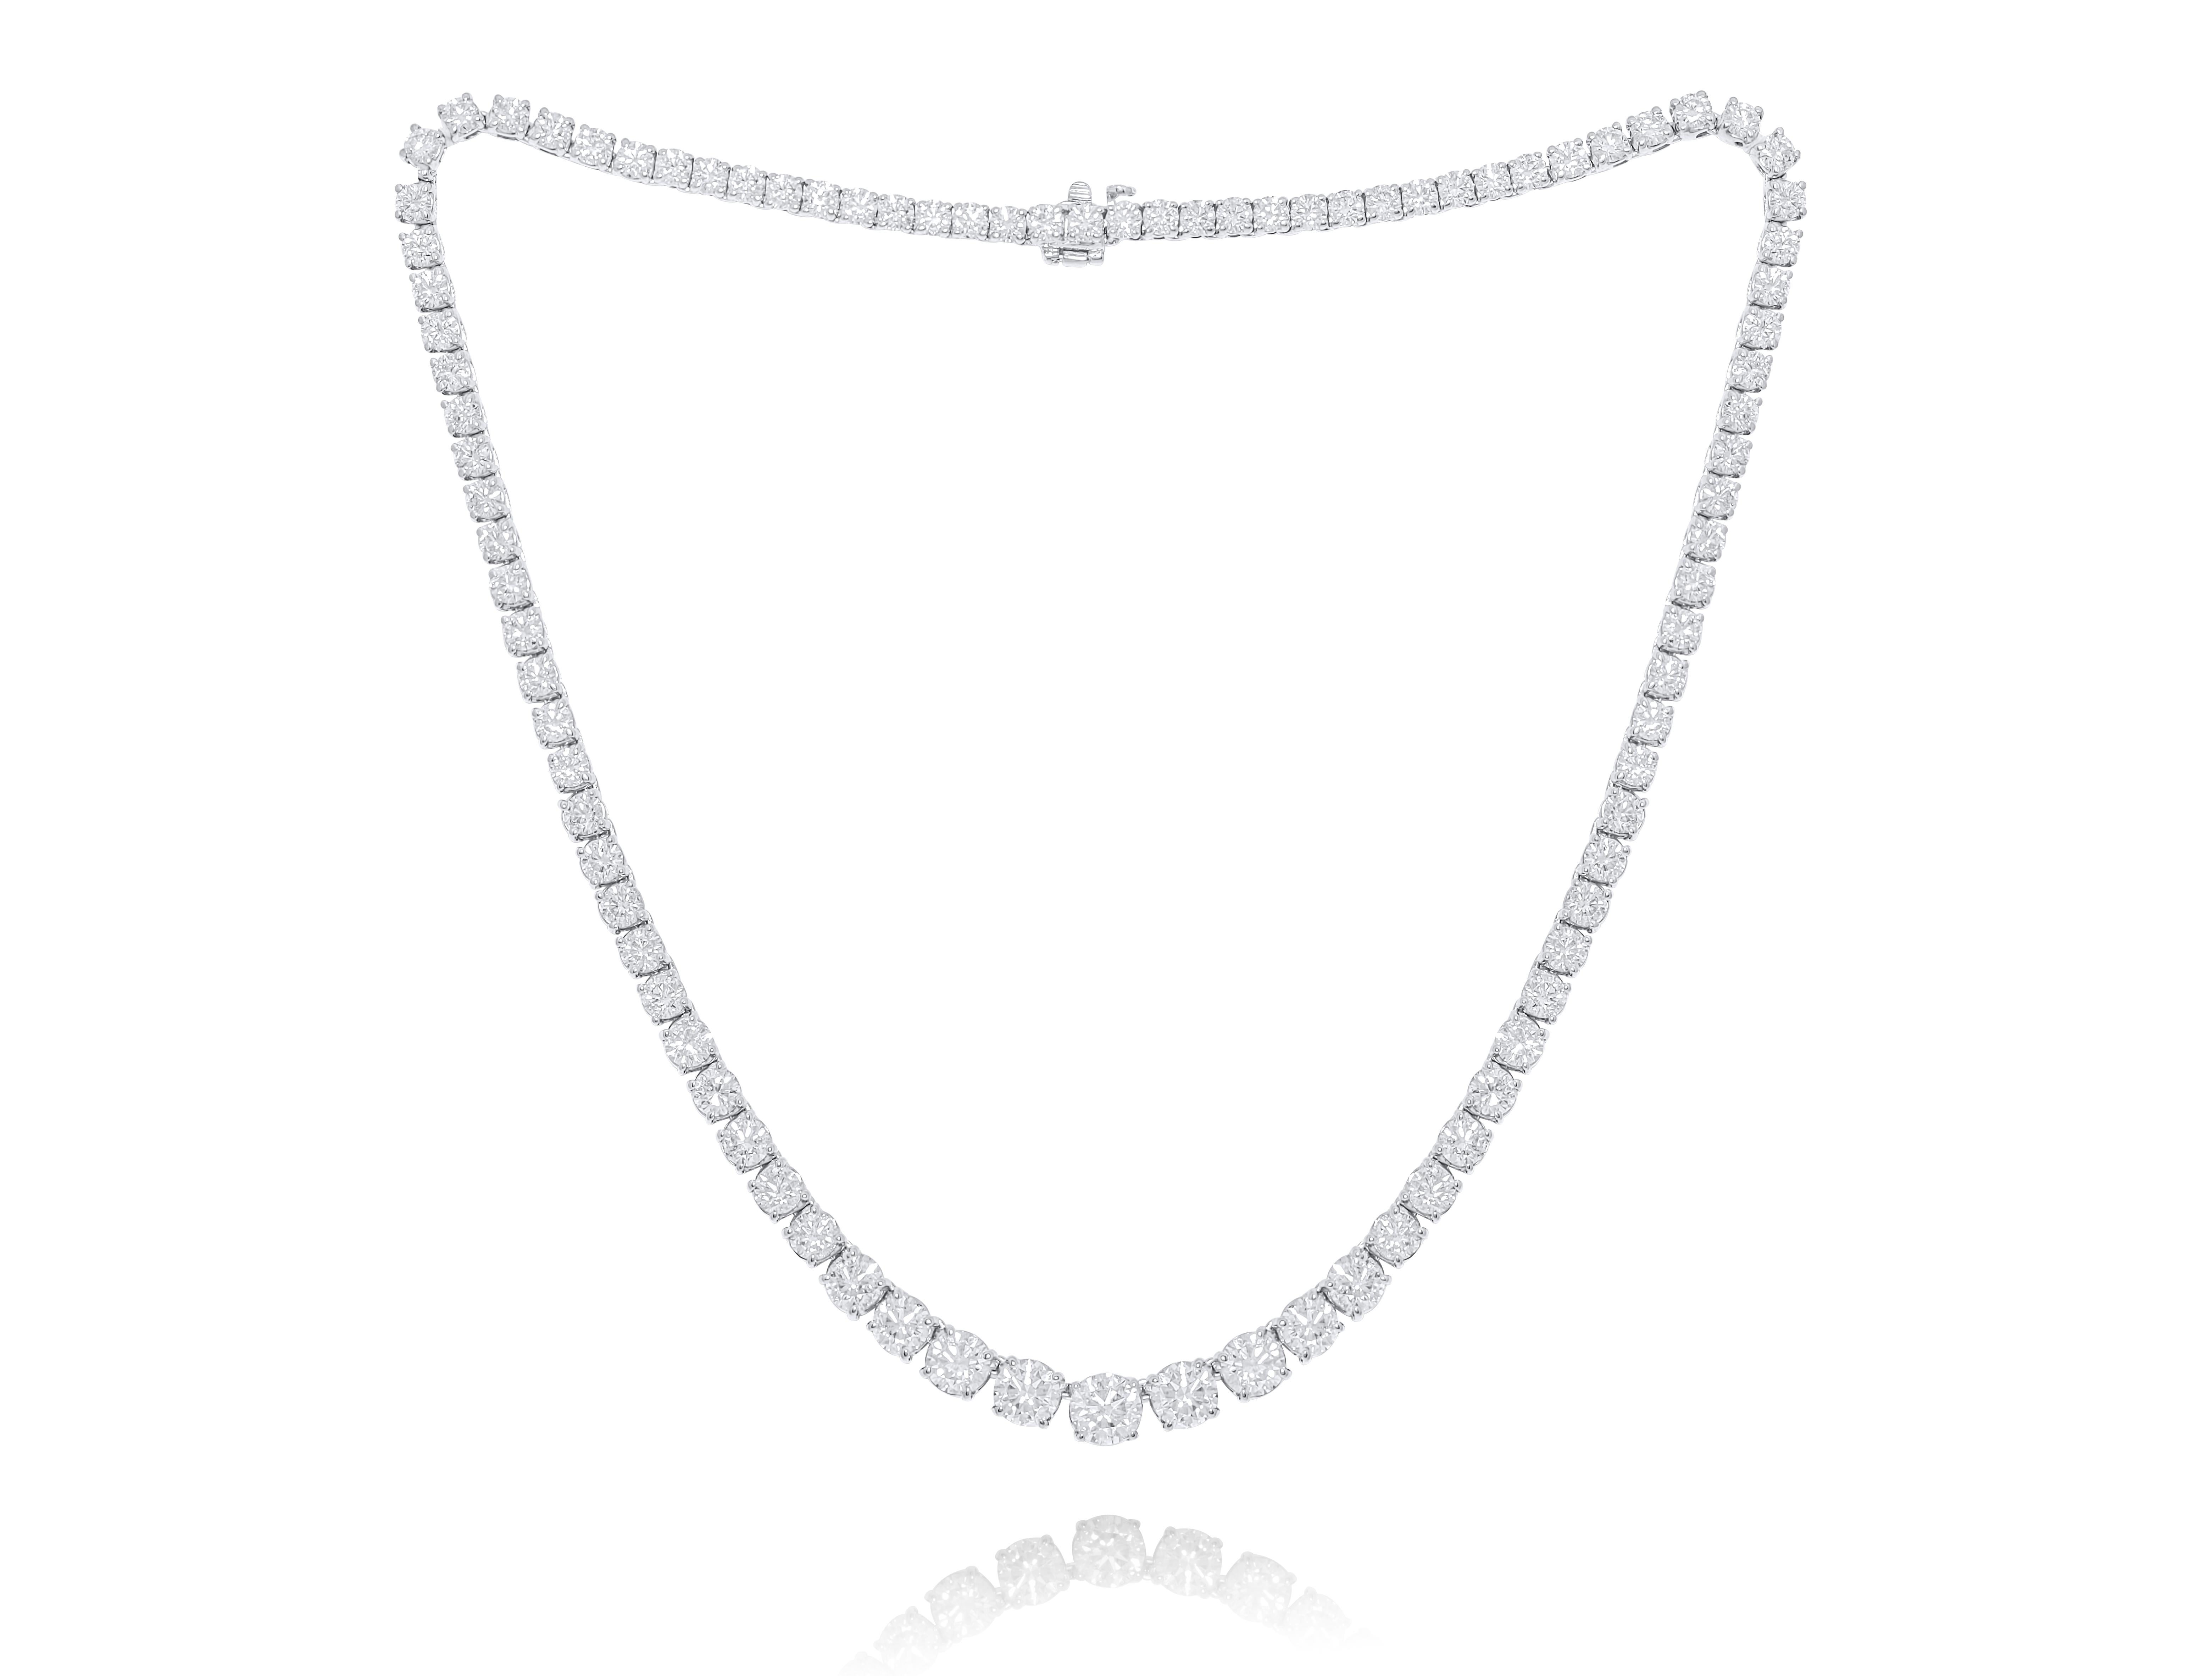 Custom 14k white gold graduated tennis necklace featuring 16.75 cts  round brilliant diamonds set in a 4 prong setting  107 stones  0.15 each FG color SI clarity. Excellent  cut. 
